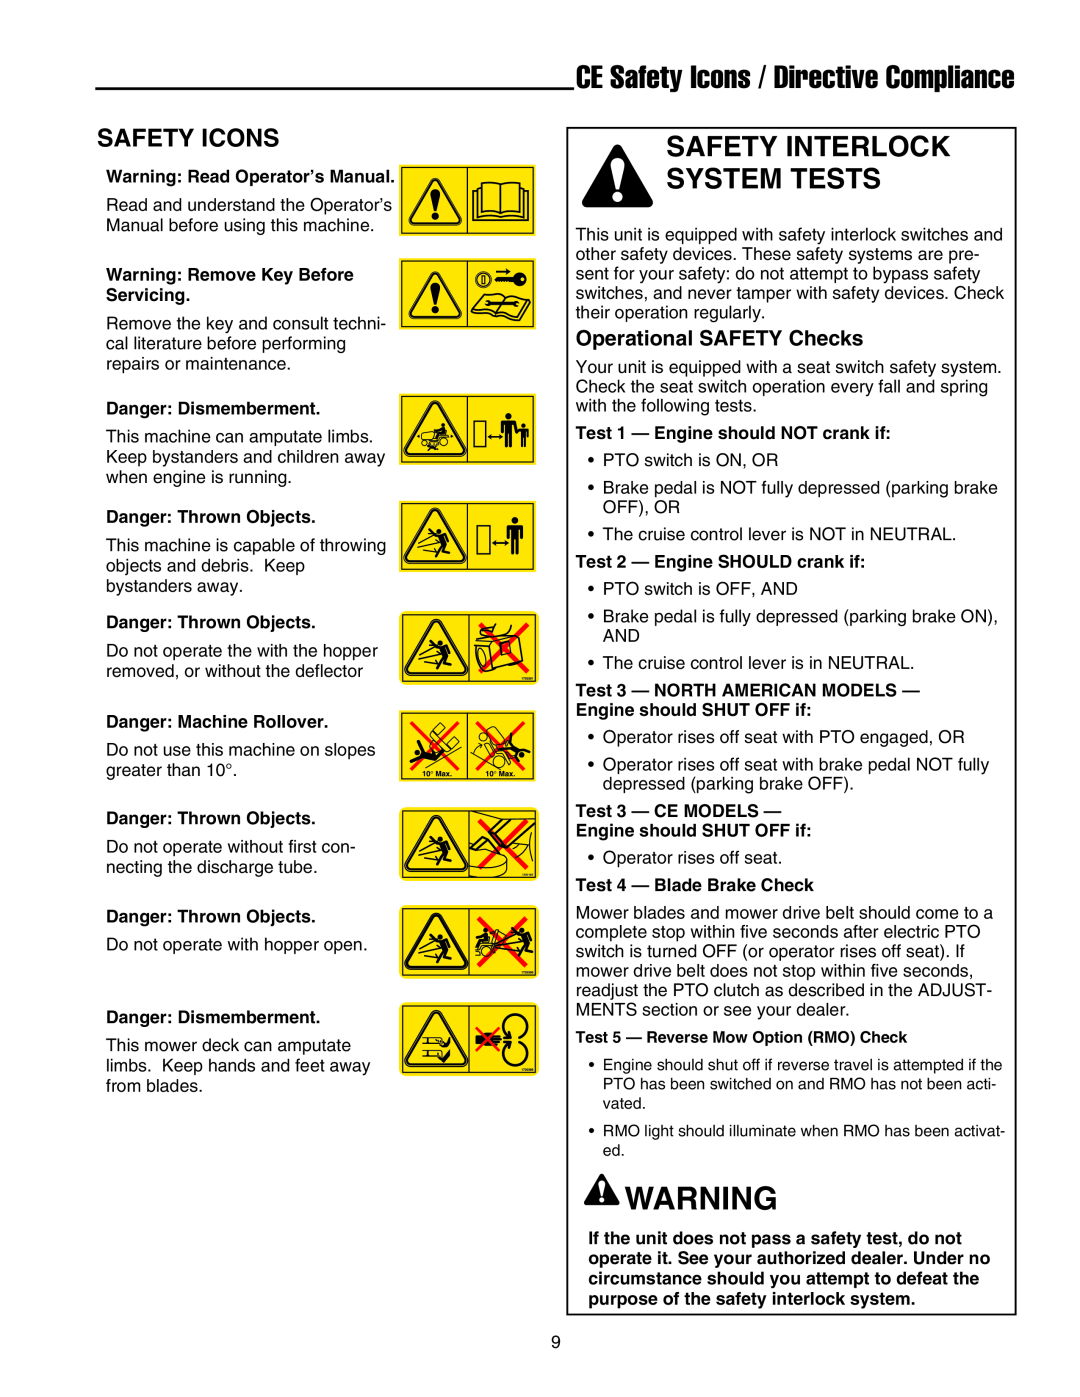 Snapper XL Series manual CE Safety Icons / Directive Compliance, Safety Interlock System Tests 